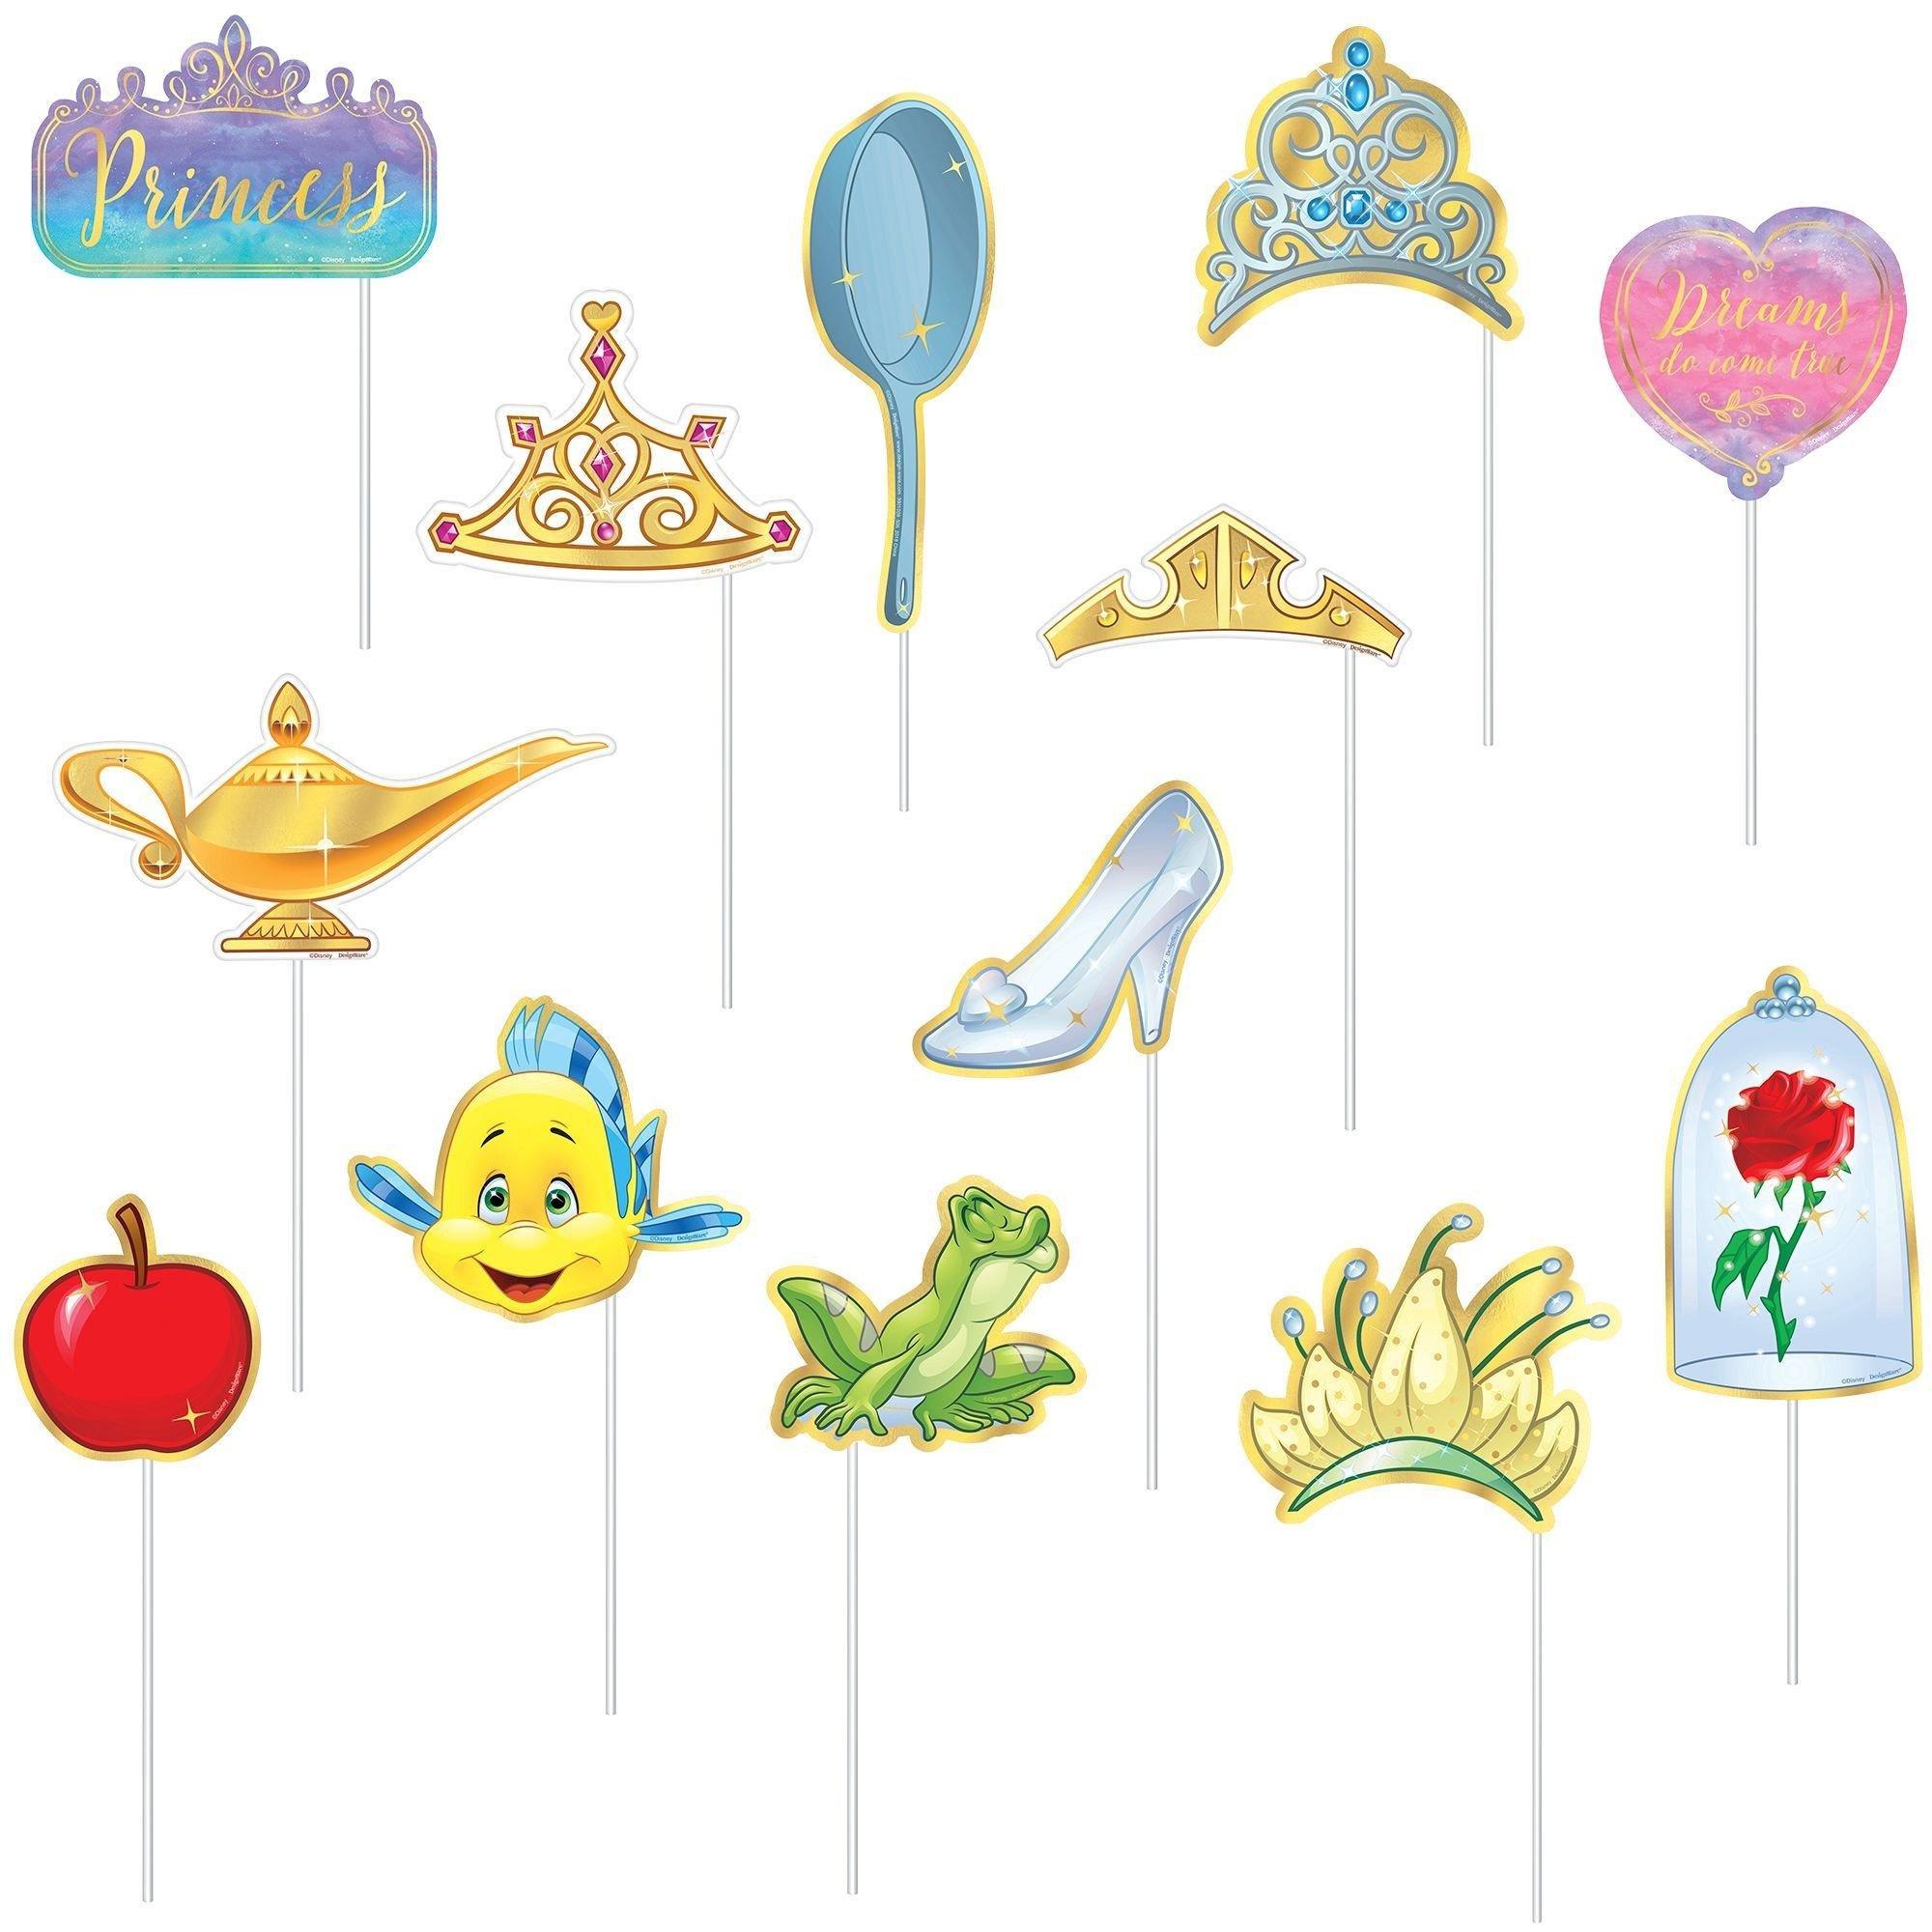 Ultimate Disney Princess Party Supplies Pack for 24 Guests - Kit Includes Plates, Napkins, Cups, Table Covers, Centerpiece Decorations & Banner